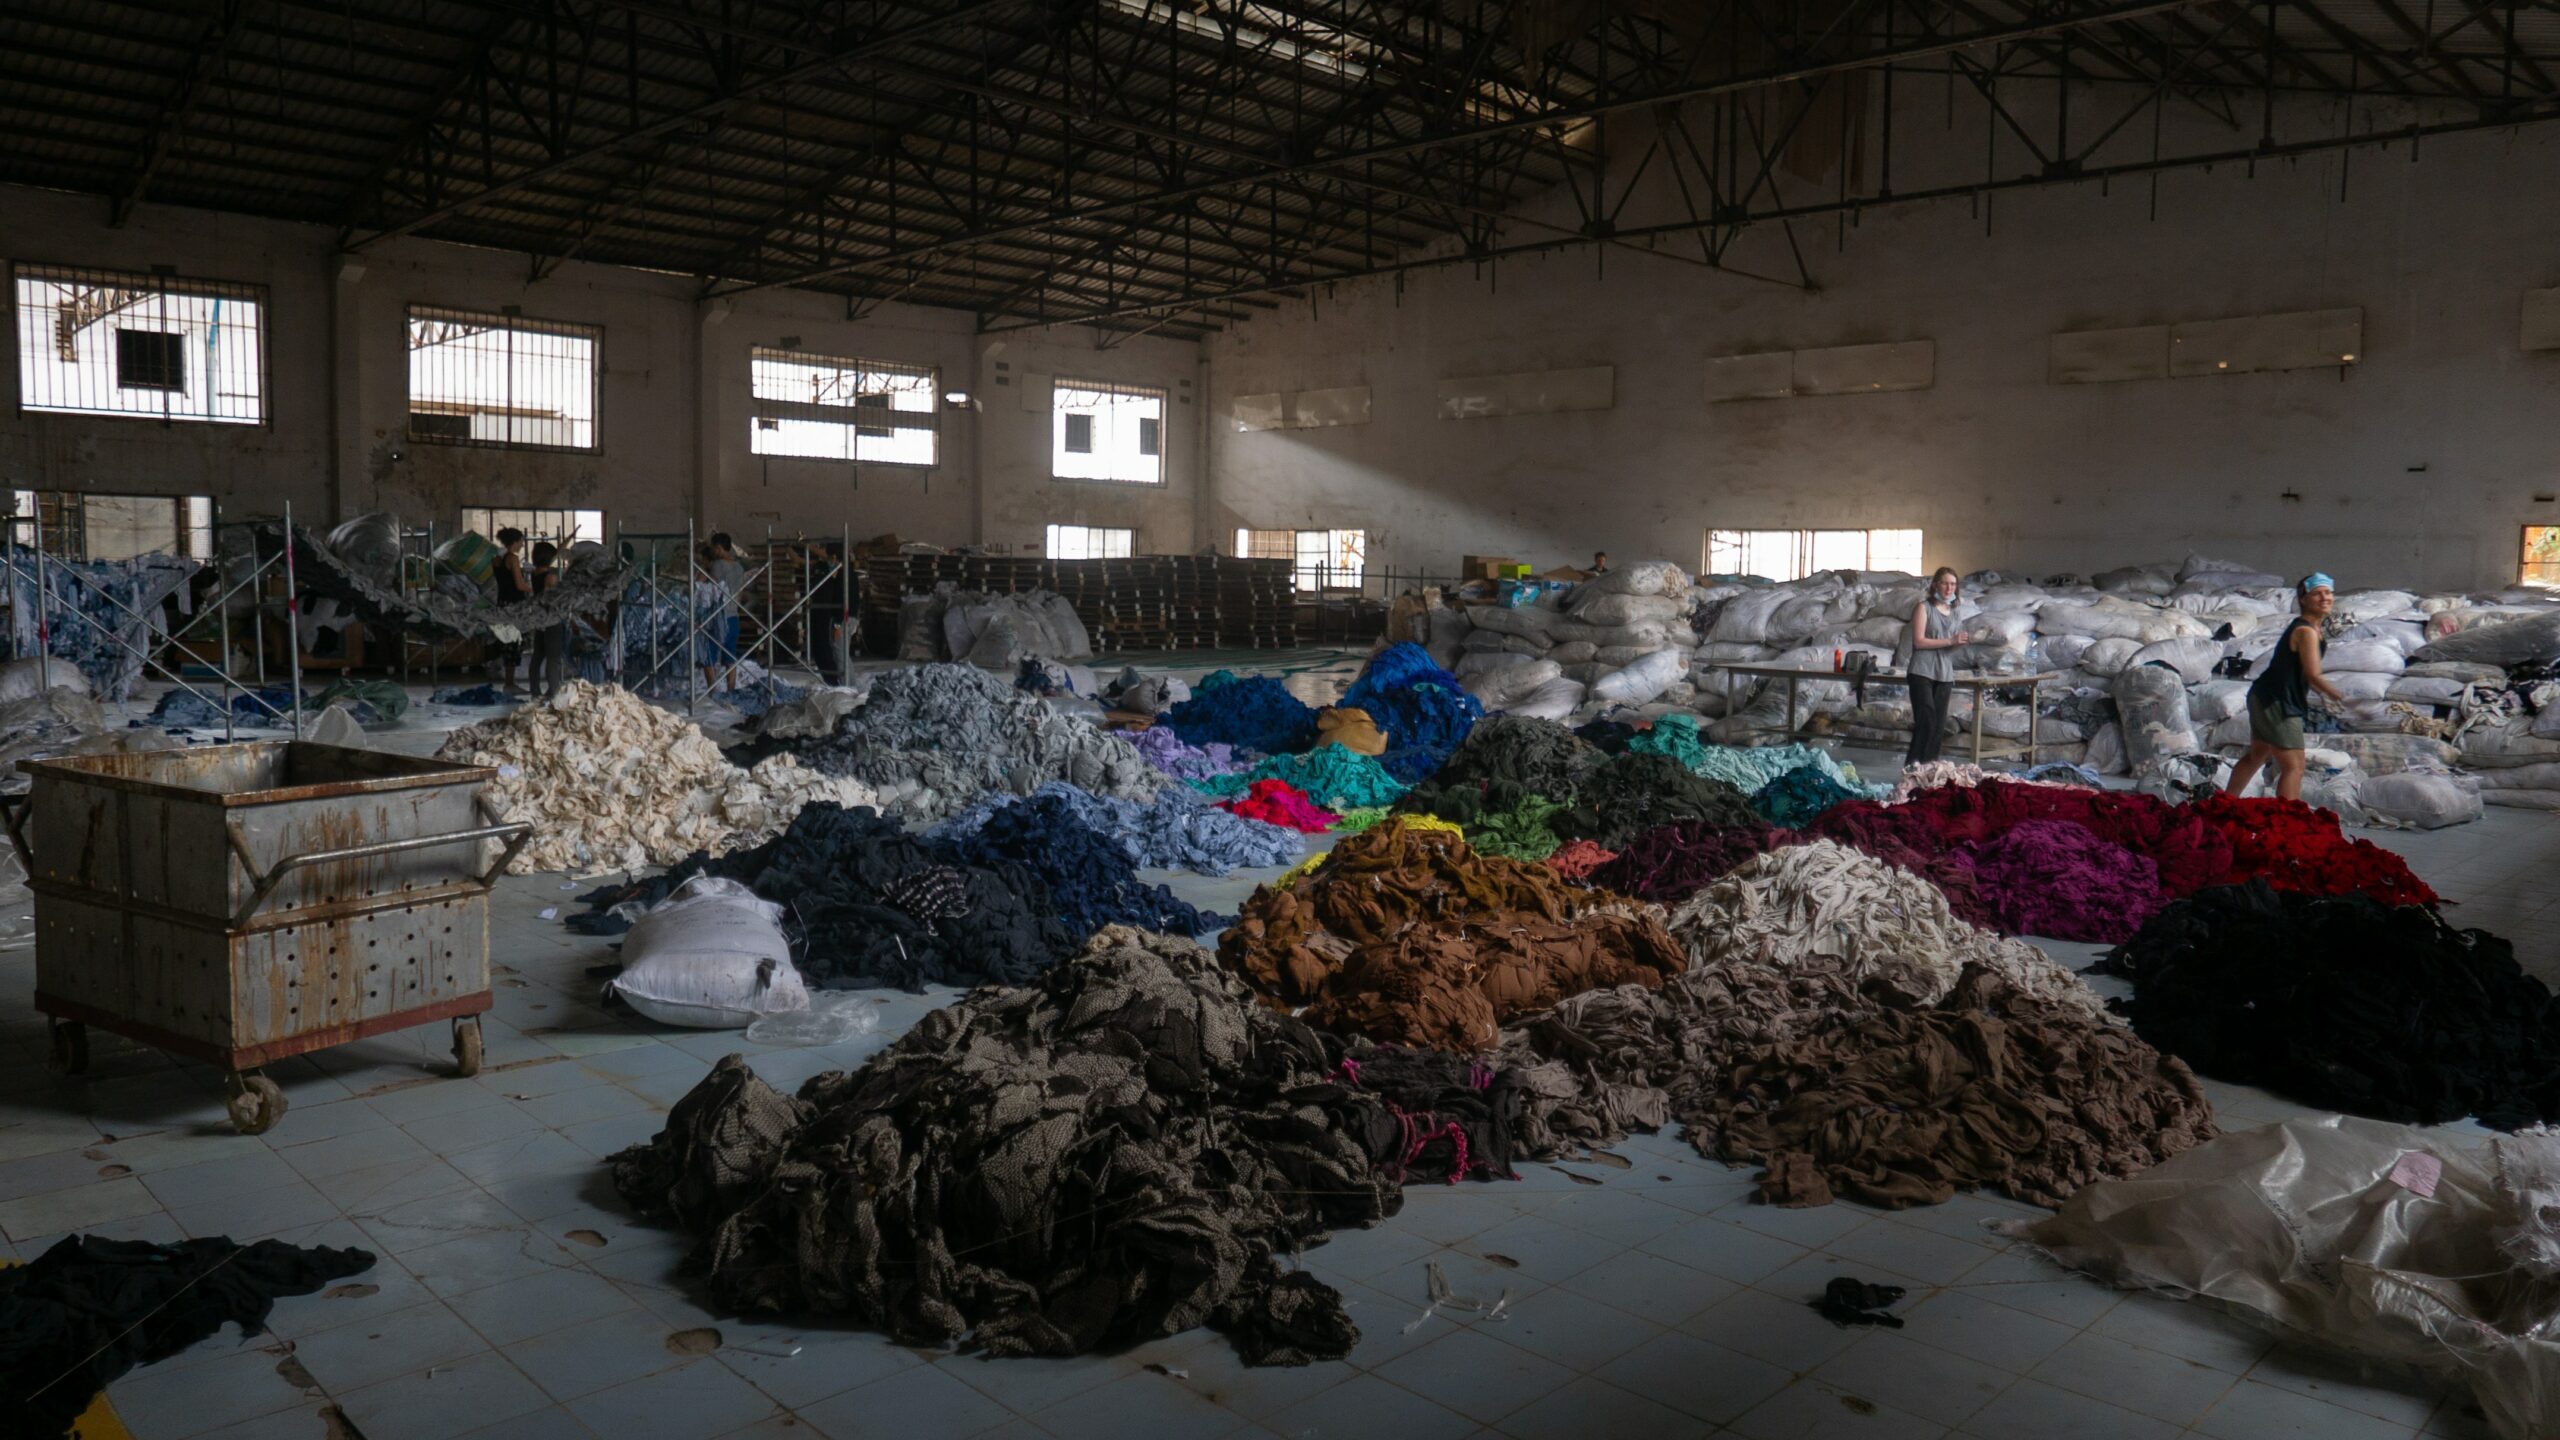 A huge industrial hall with many piles of textile garbage in different colours on the floor. Two women carrying some textiles from the center to the right.